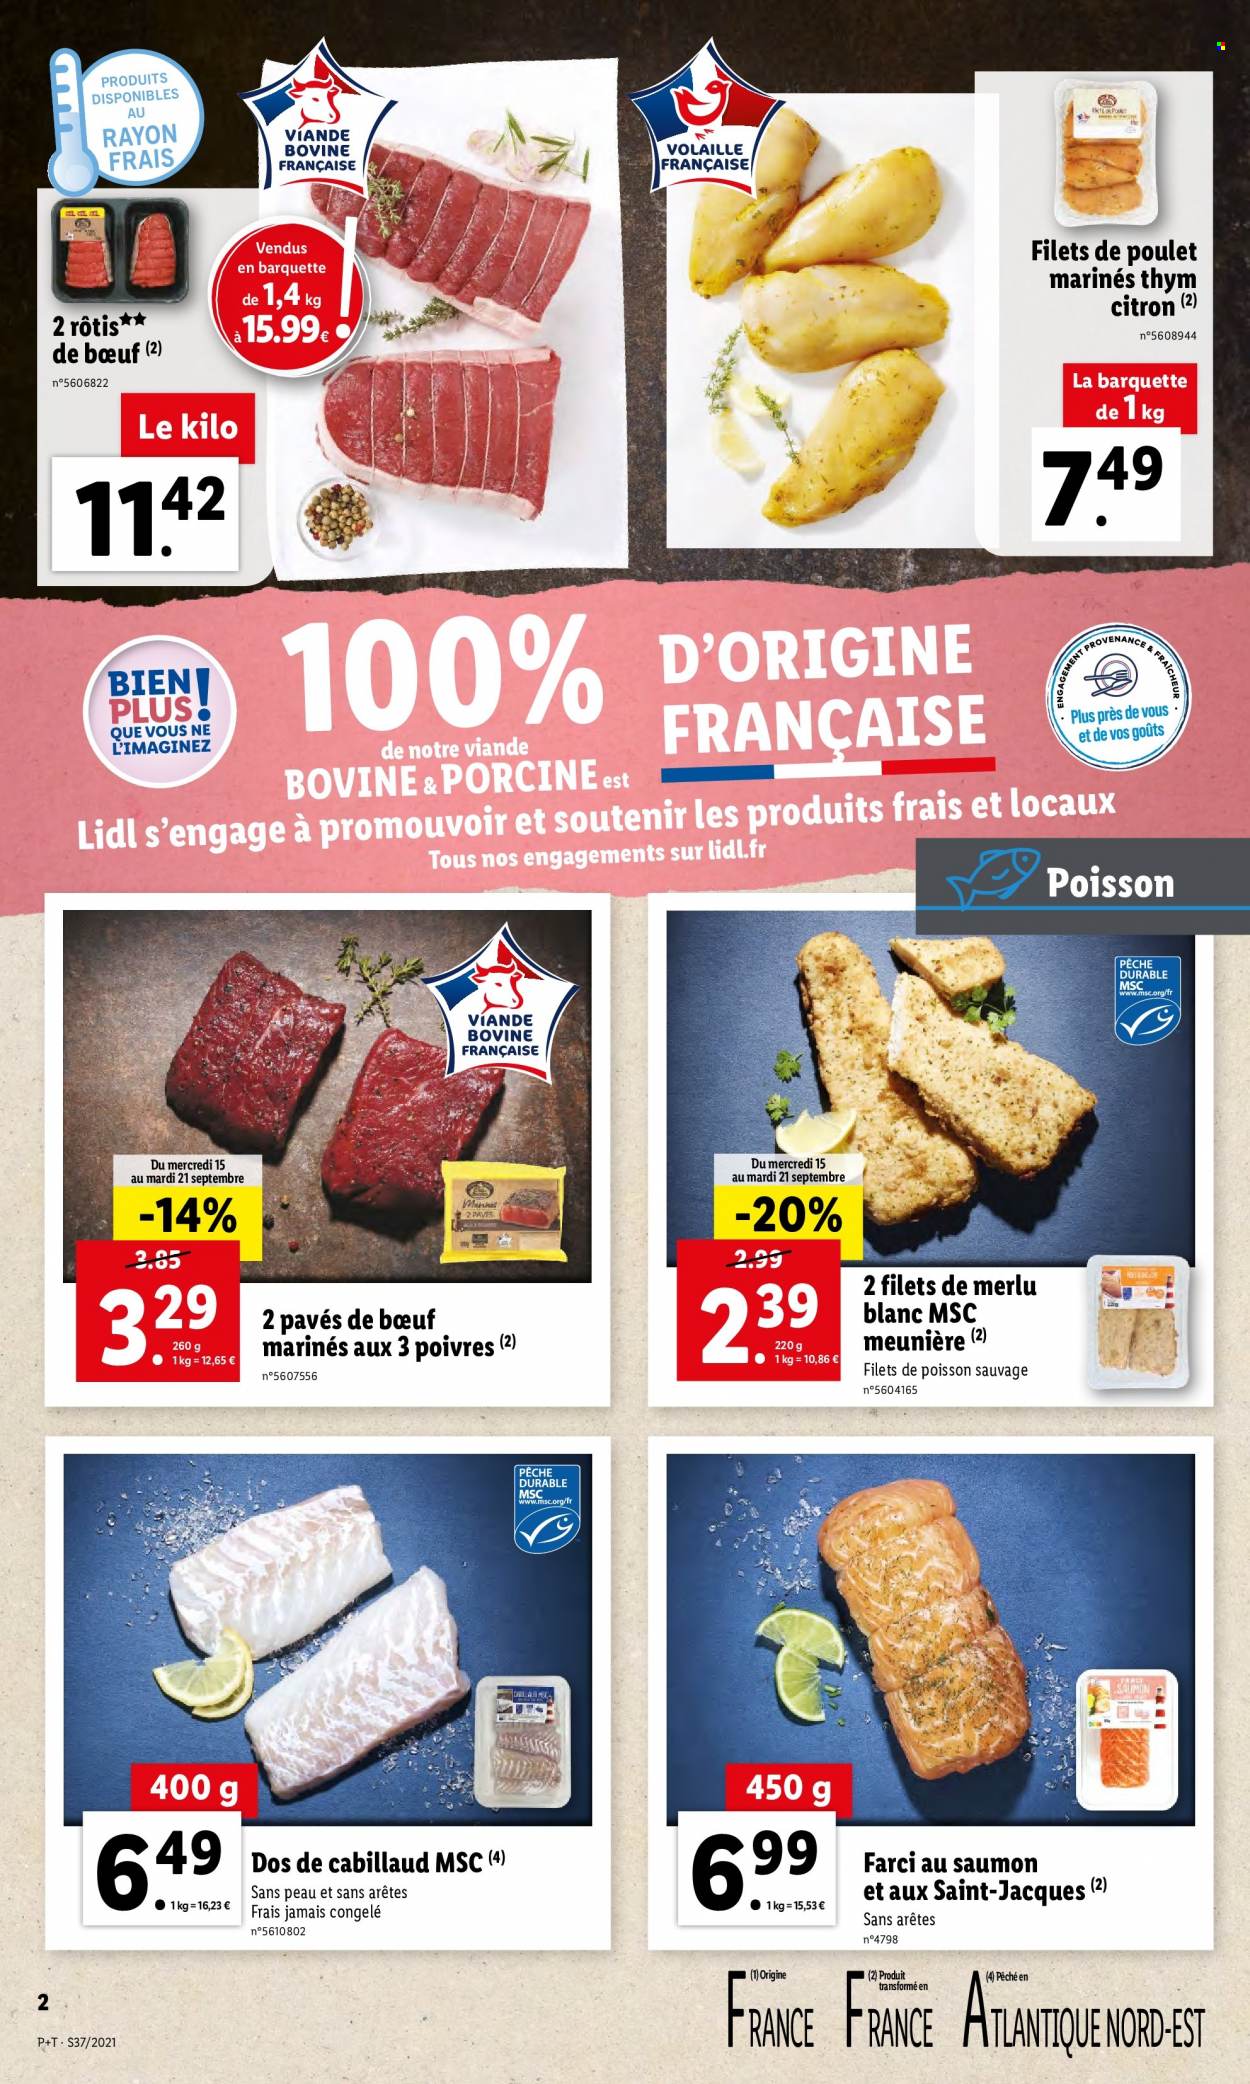 Catalogue Lidl - 15.09.2021 - 21.09.2021. Page 2.